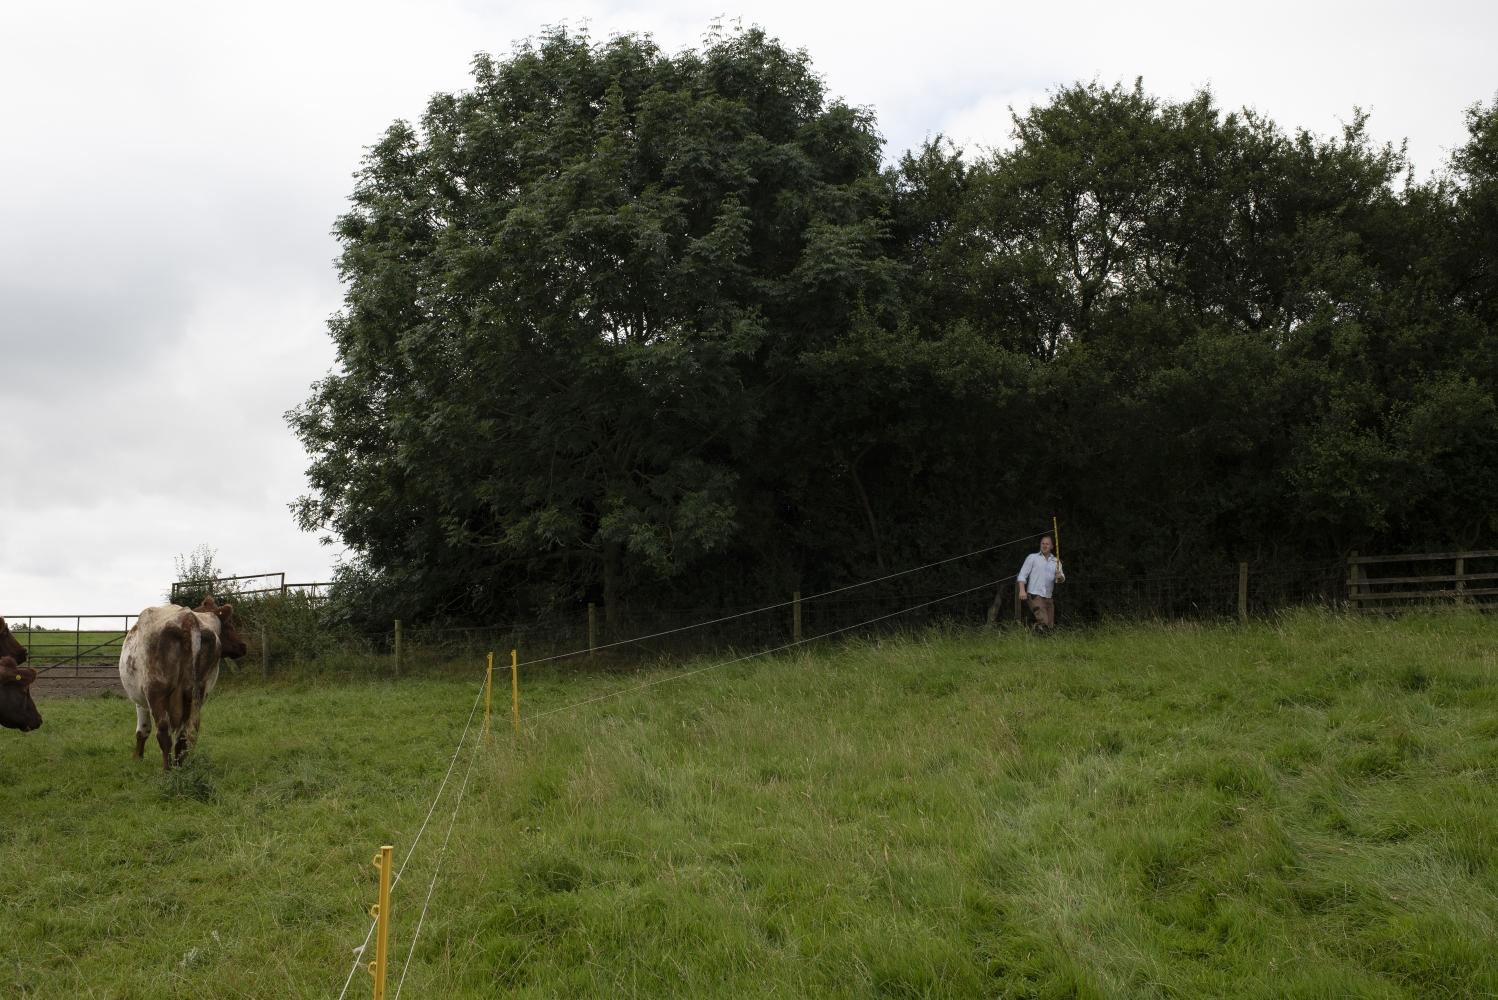 A man setting up an electric fence in a field